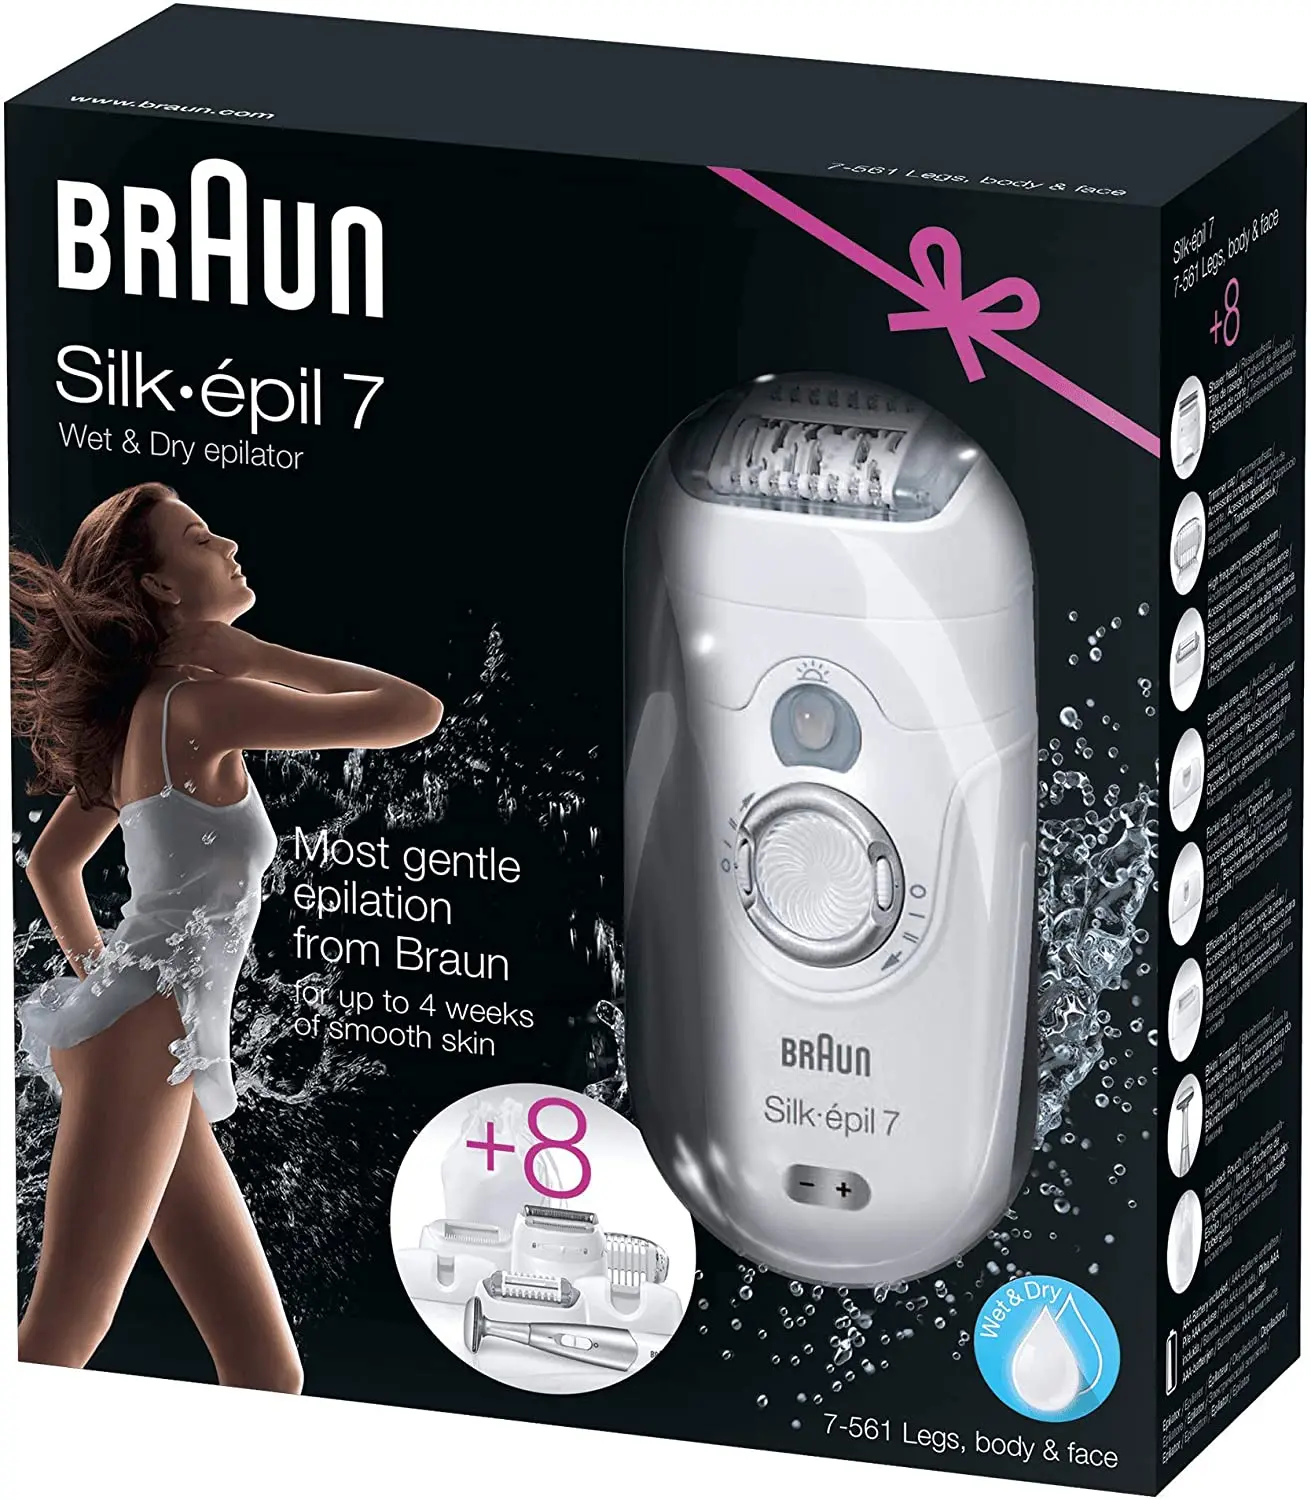 

Braun silk-epil 7 7561 wet and dry epilator women cordless for removal and hair removal 8 extras including the Bikini Wax,professional epilator laser,hifu machine,Depilator,trimmer for intimate areas,Hair removal